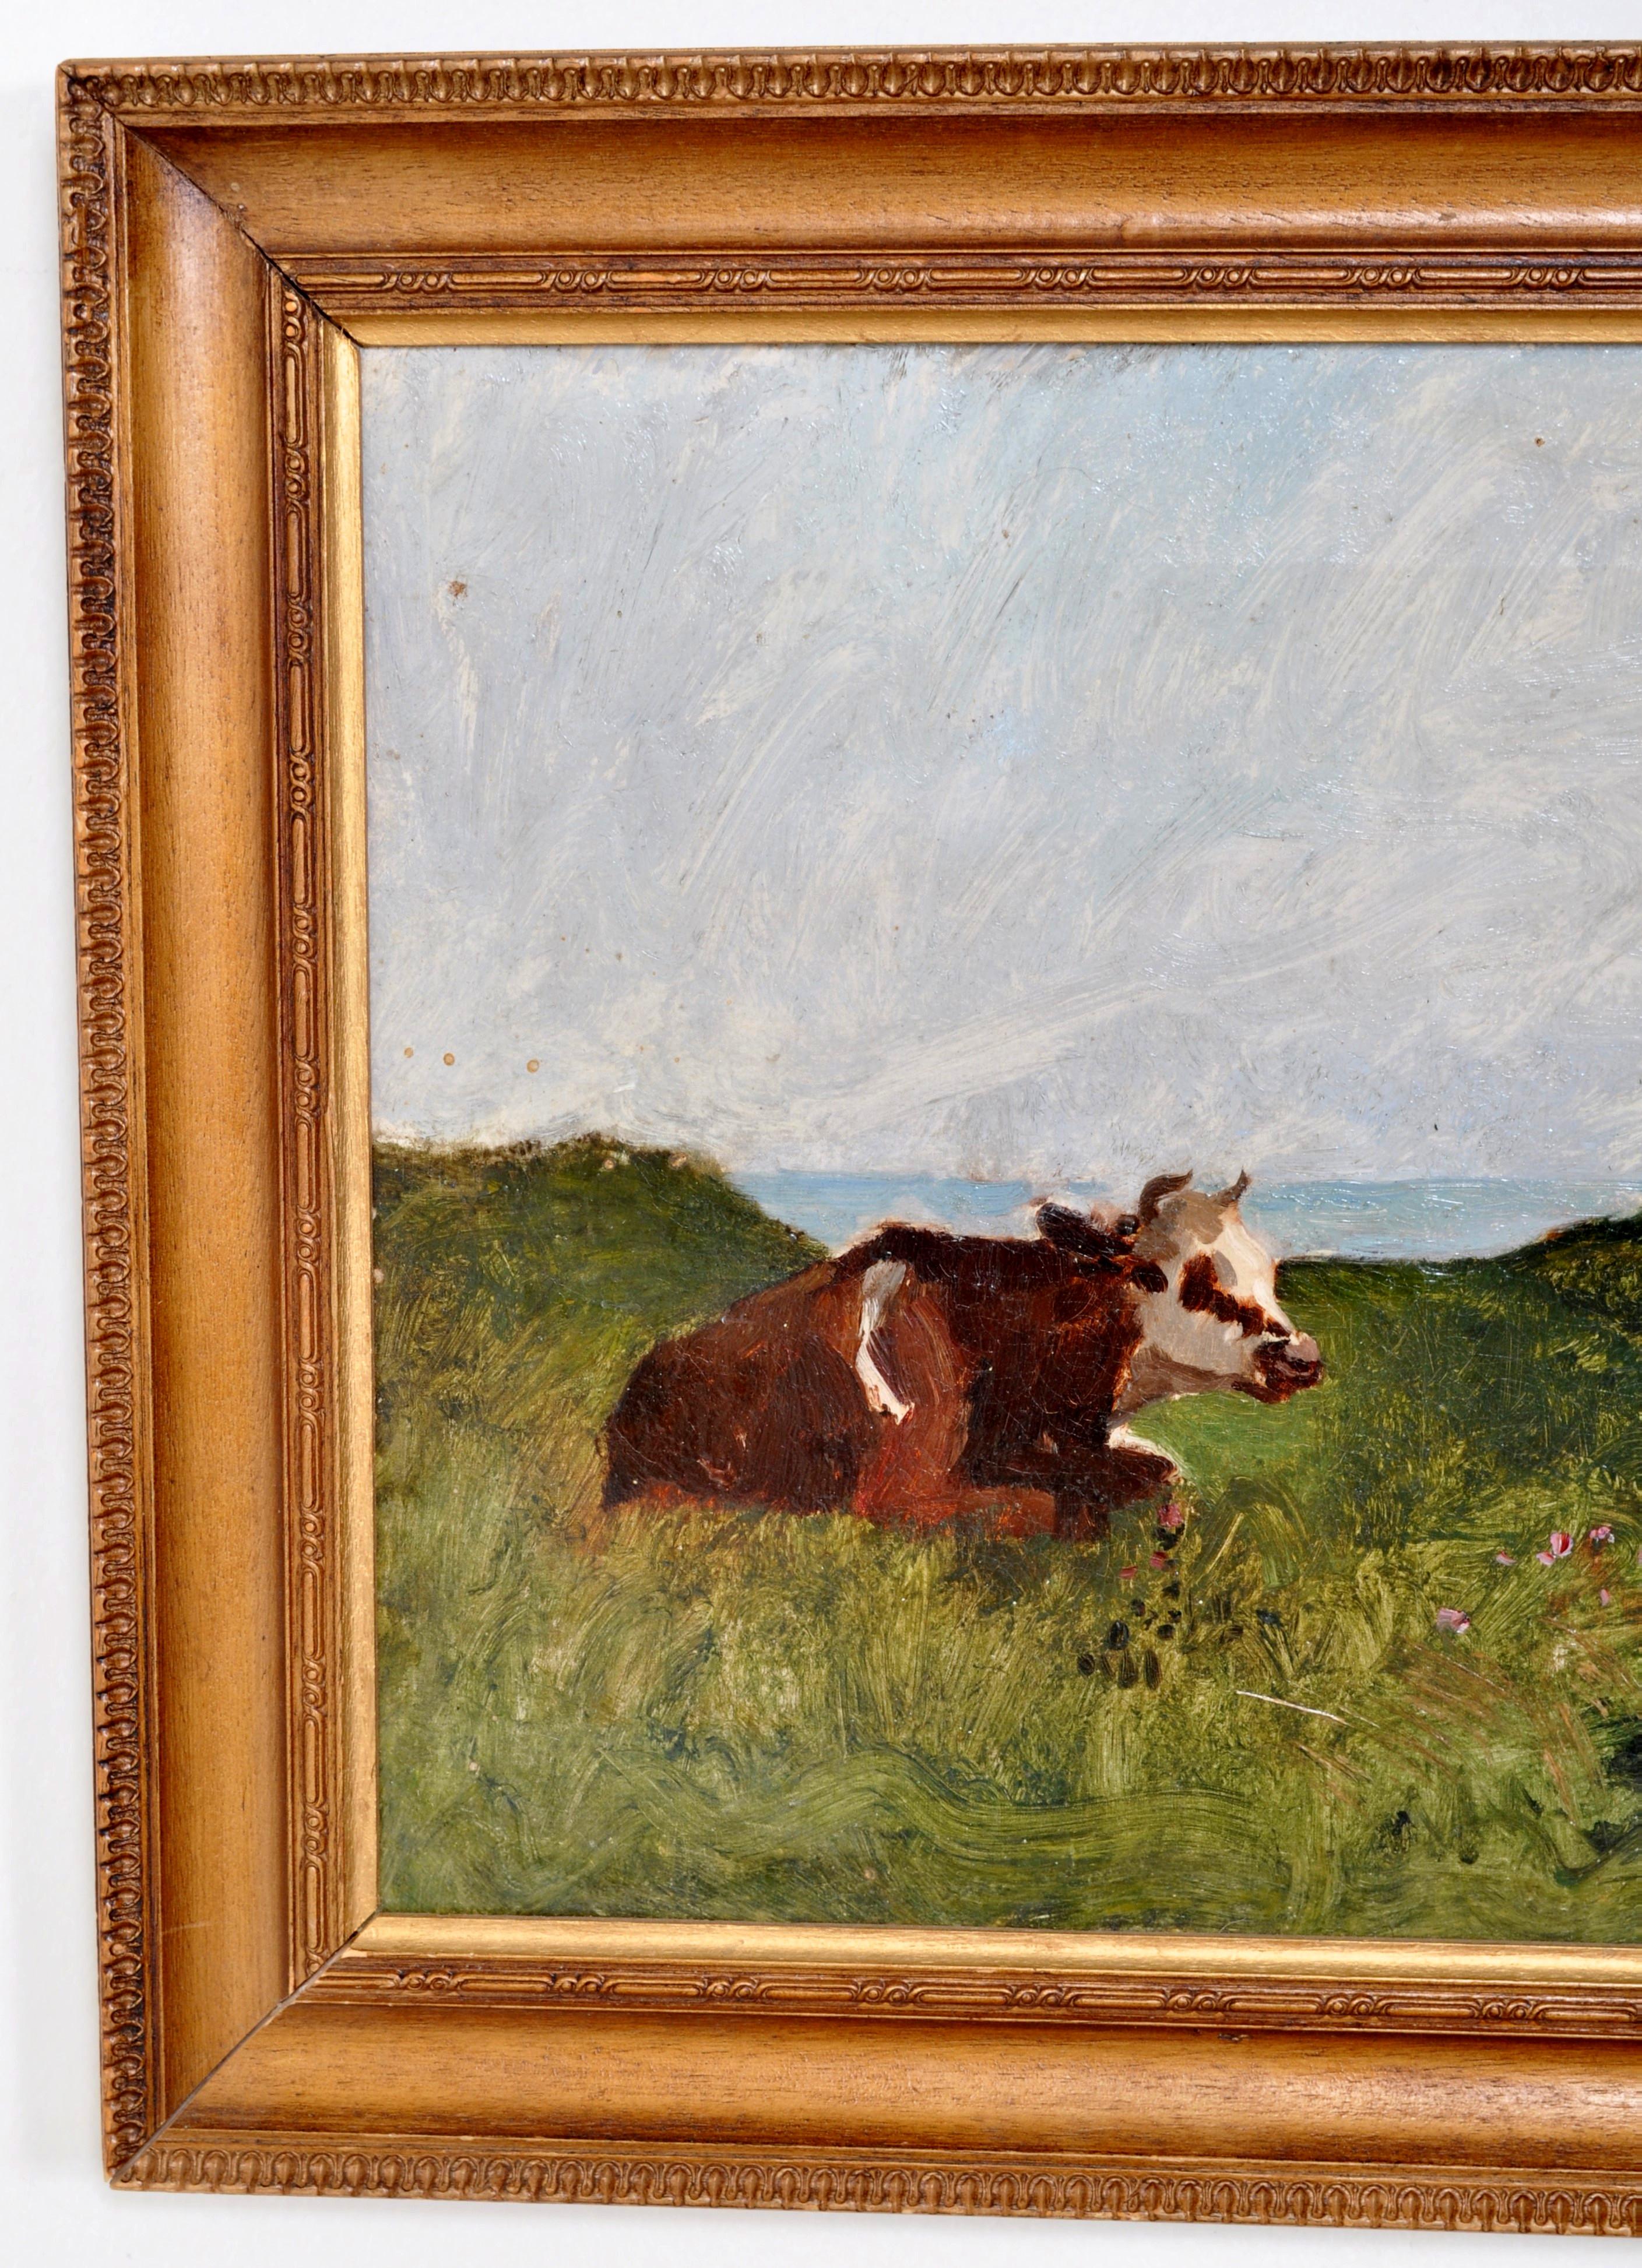 A good antique French Impressionist oil on canvas Painting by Ernest Ange Duez (1843–1896), the painting circa 1880. This work depicts cows grazing on a plateau above the ocean. The painting is in good clean condition, there are two small patches to